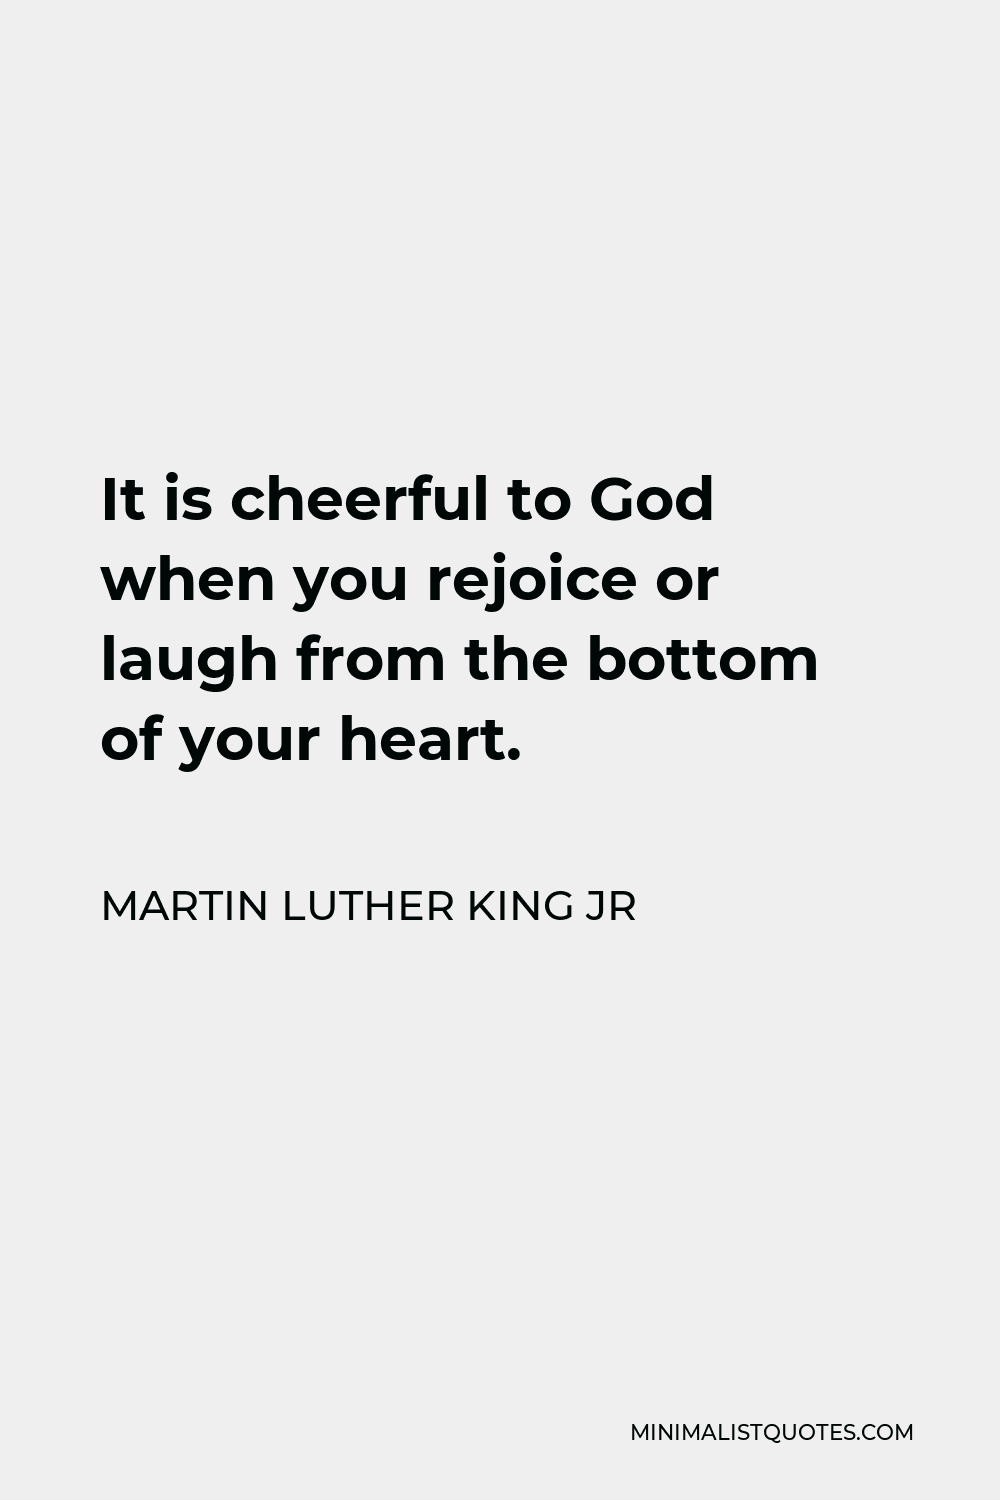 Martin Luther King Jr Quote - It is cheerful to God when you rejoice or laugh from the bottom of your heart.